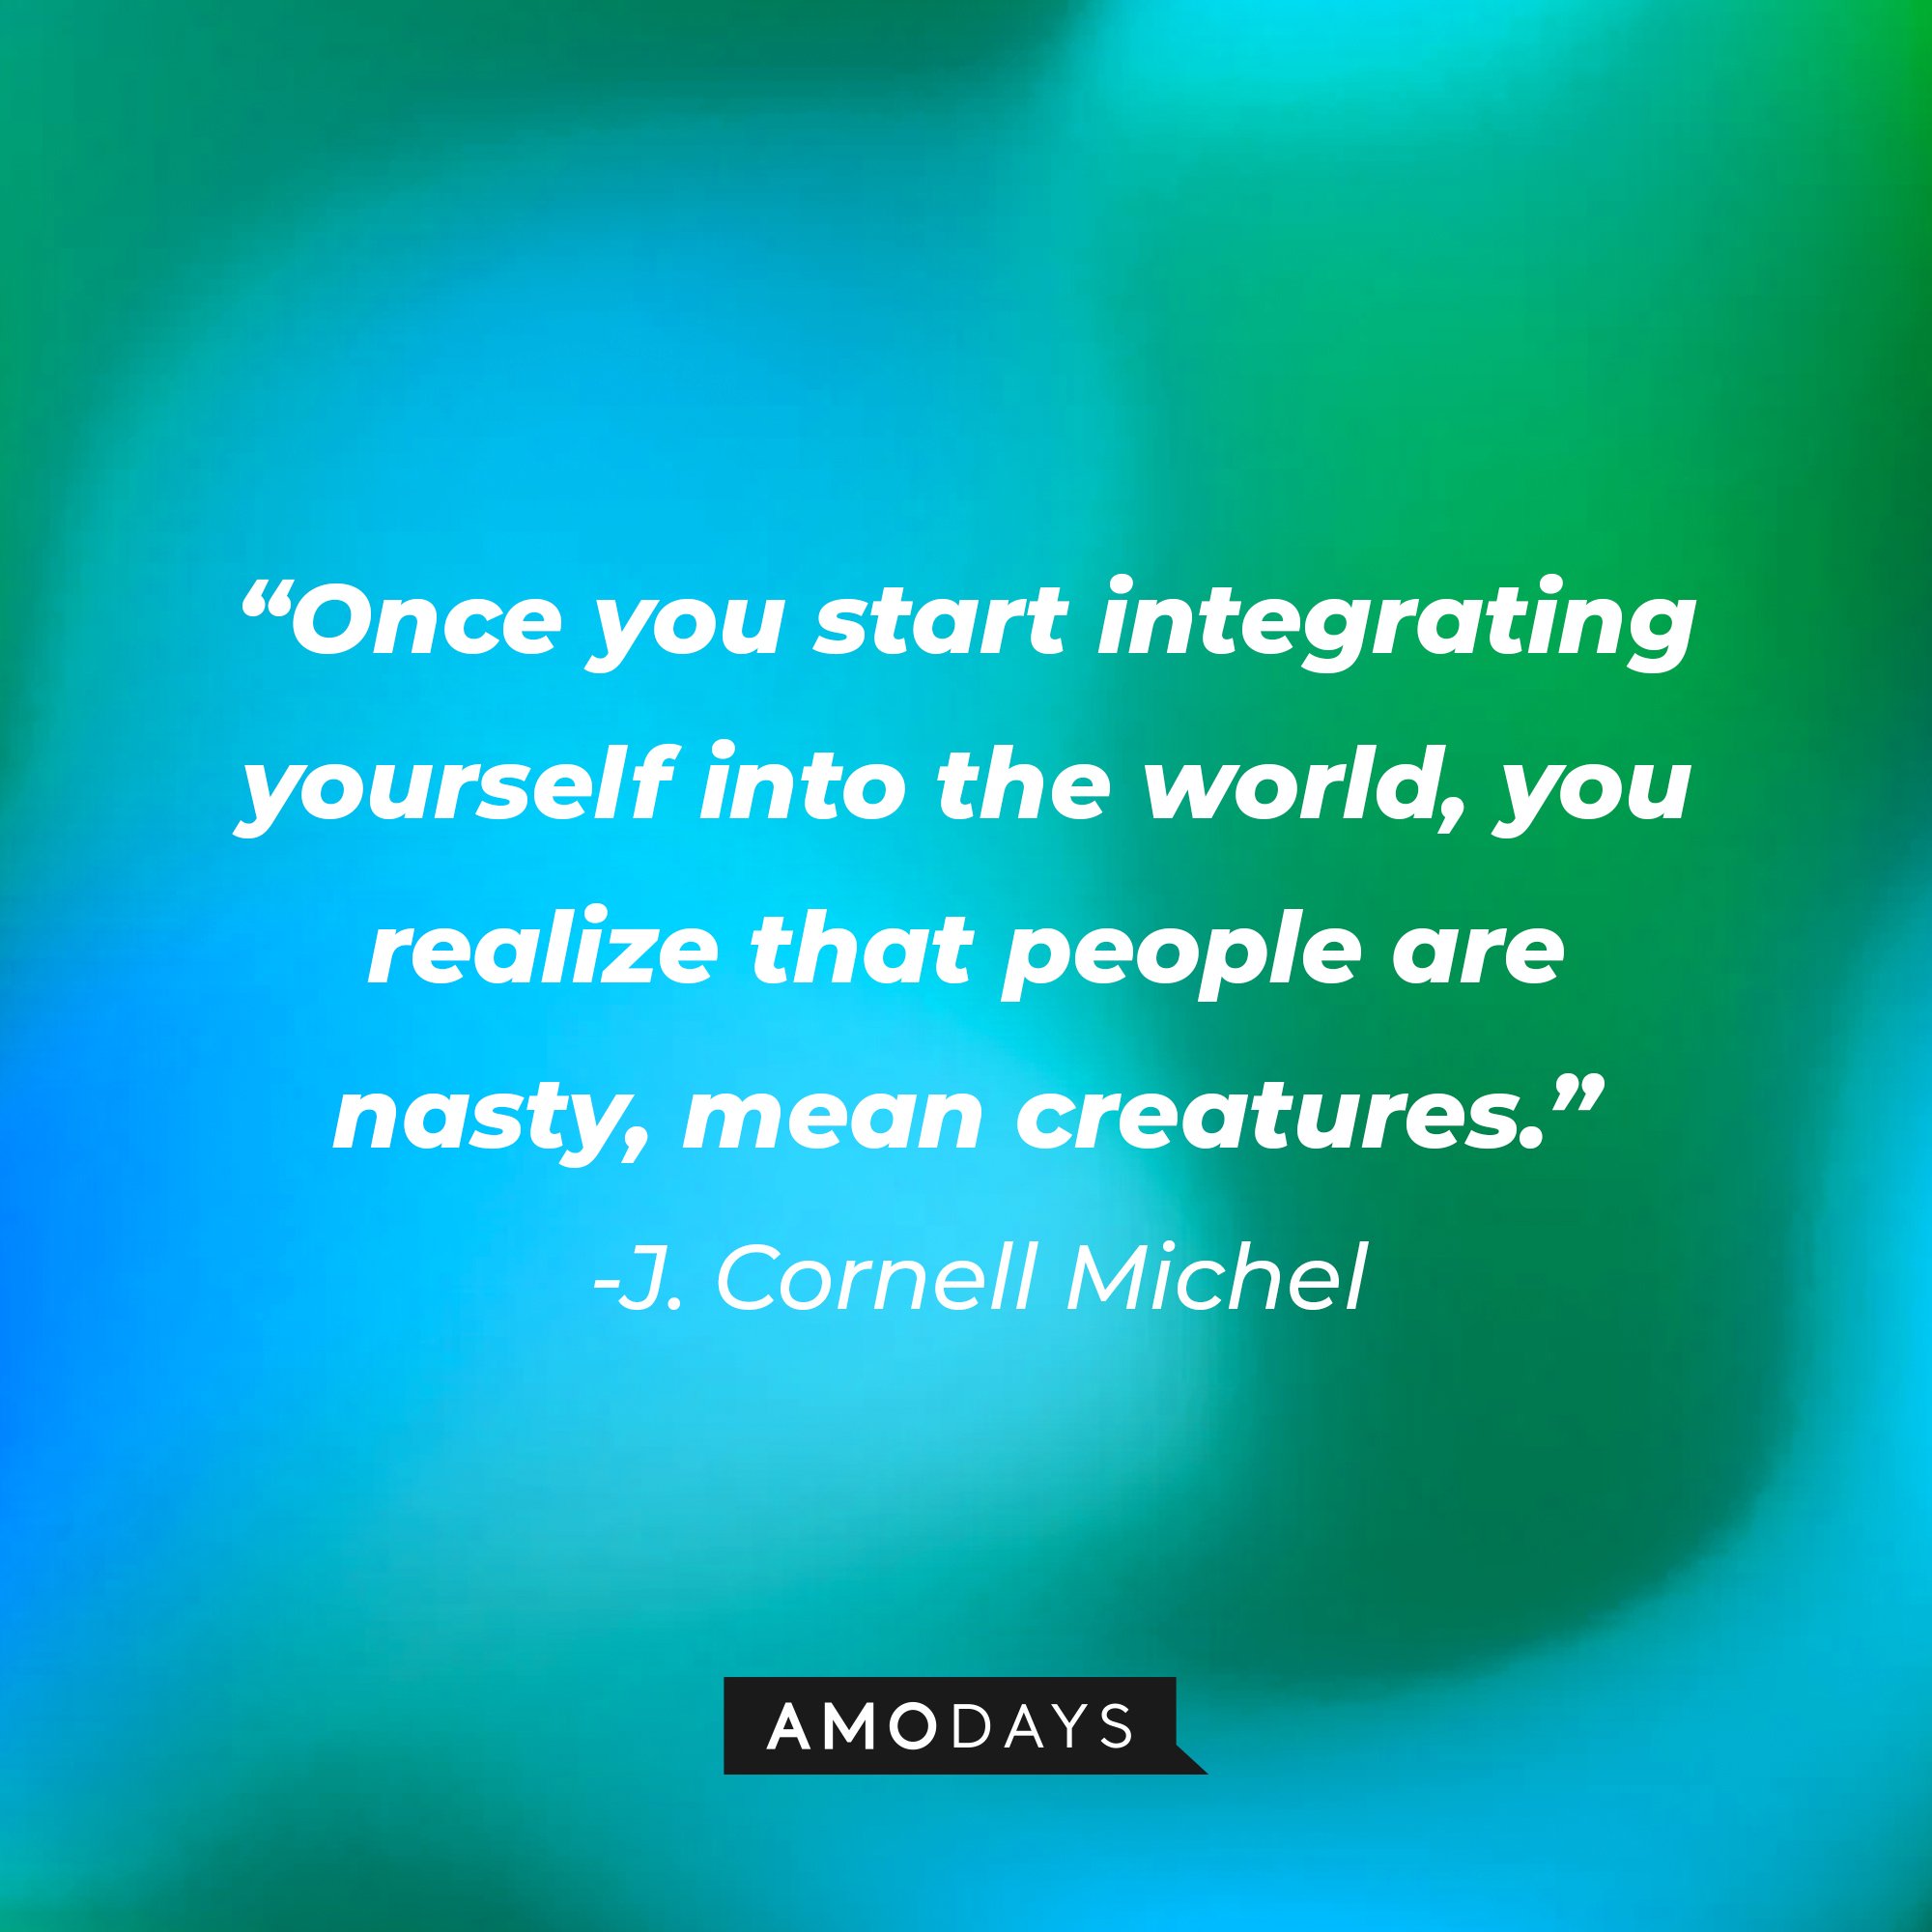 J. Cornell Michel’s quote: "Once you start integrating yourself into the world, you realize that people are nasty, mean creatures." | Image: AmoDays